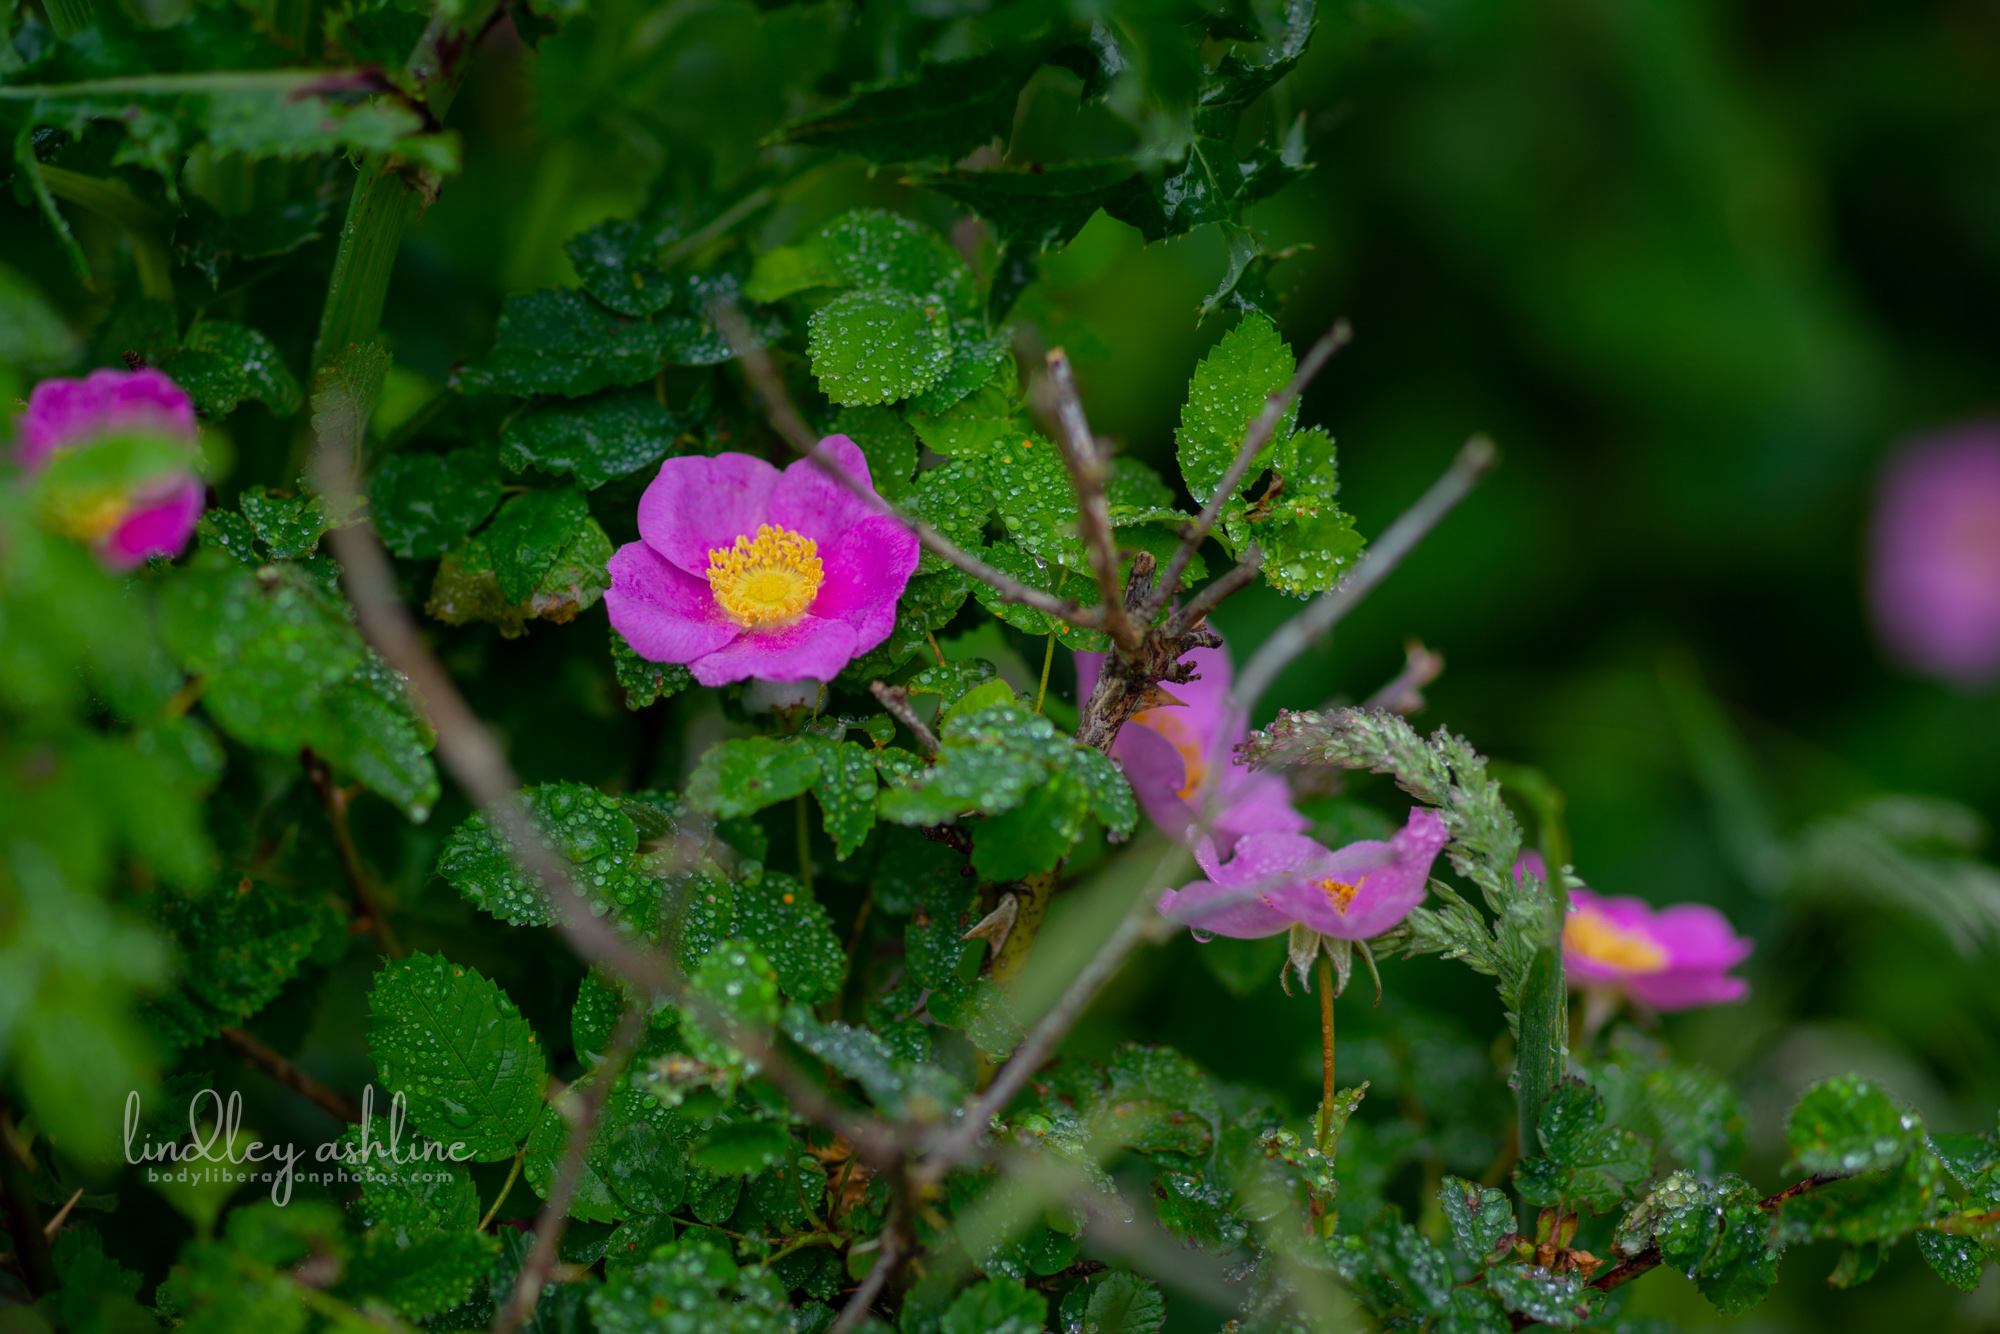 Pink wild roses bloom on a rainy day in Oregon. Raindrops sit like gems on the small green leaves.